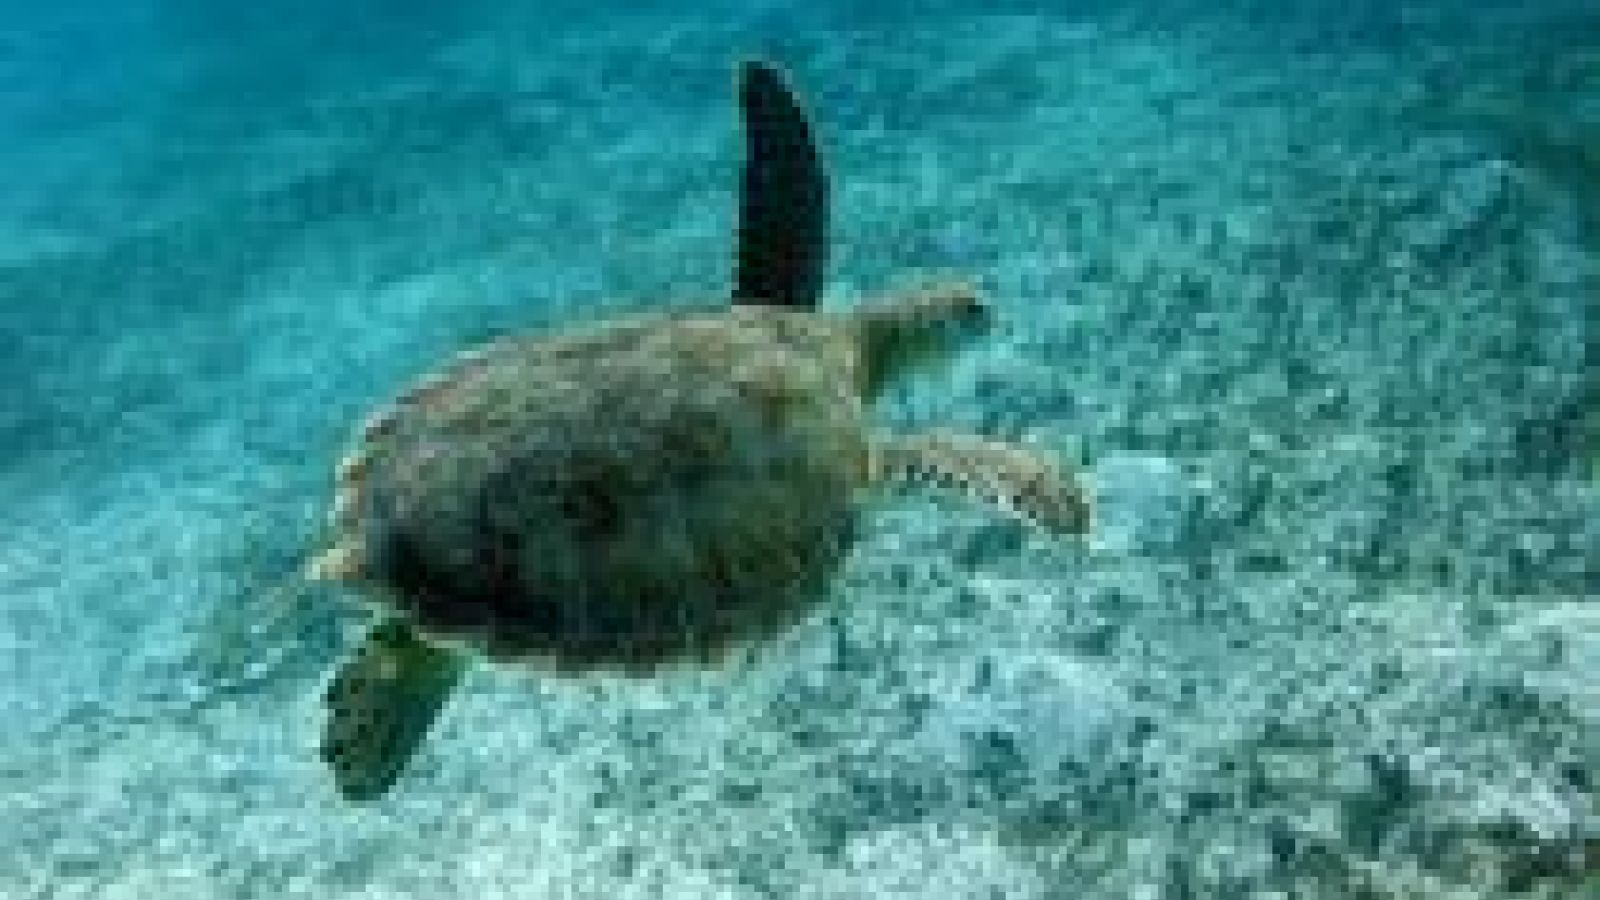 42 thousand red-listed turtles taken per year